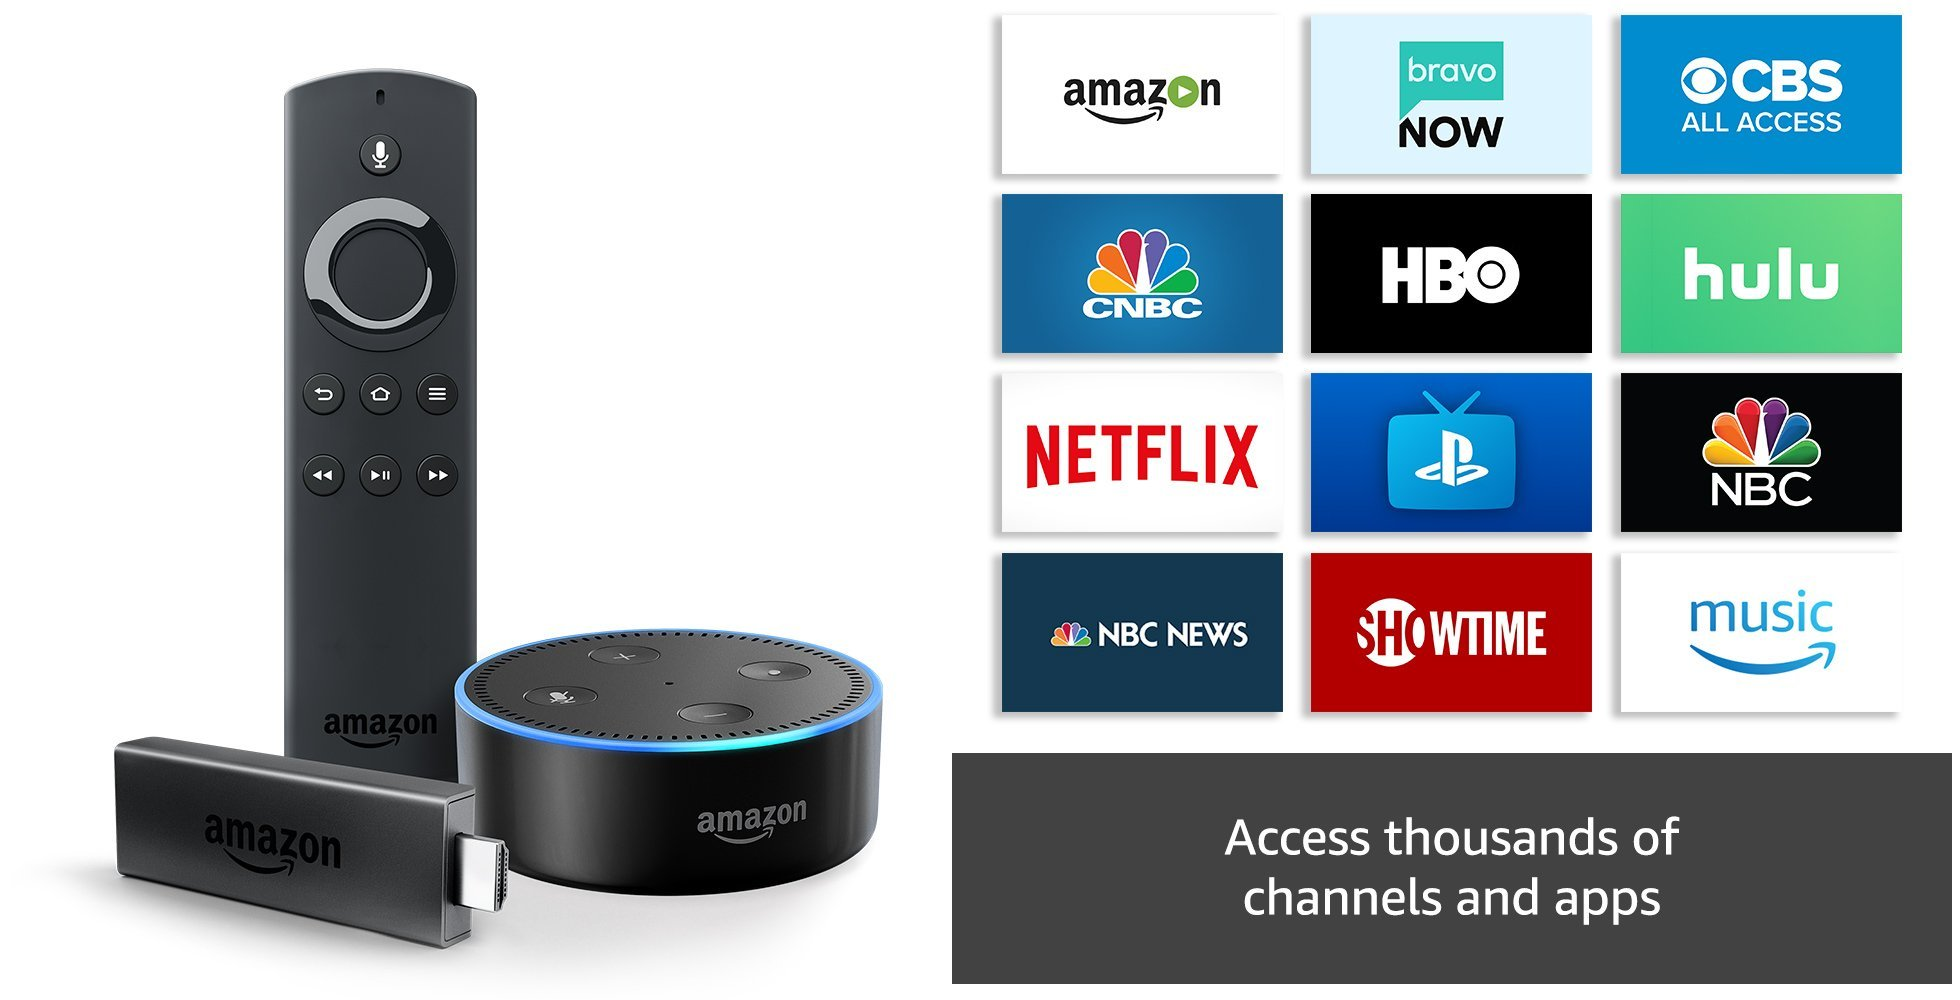 Fire TV Stick With Alexa Voice Remote + Echo Dot Deal